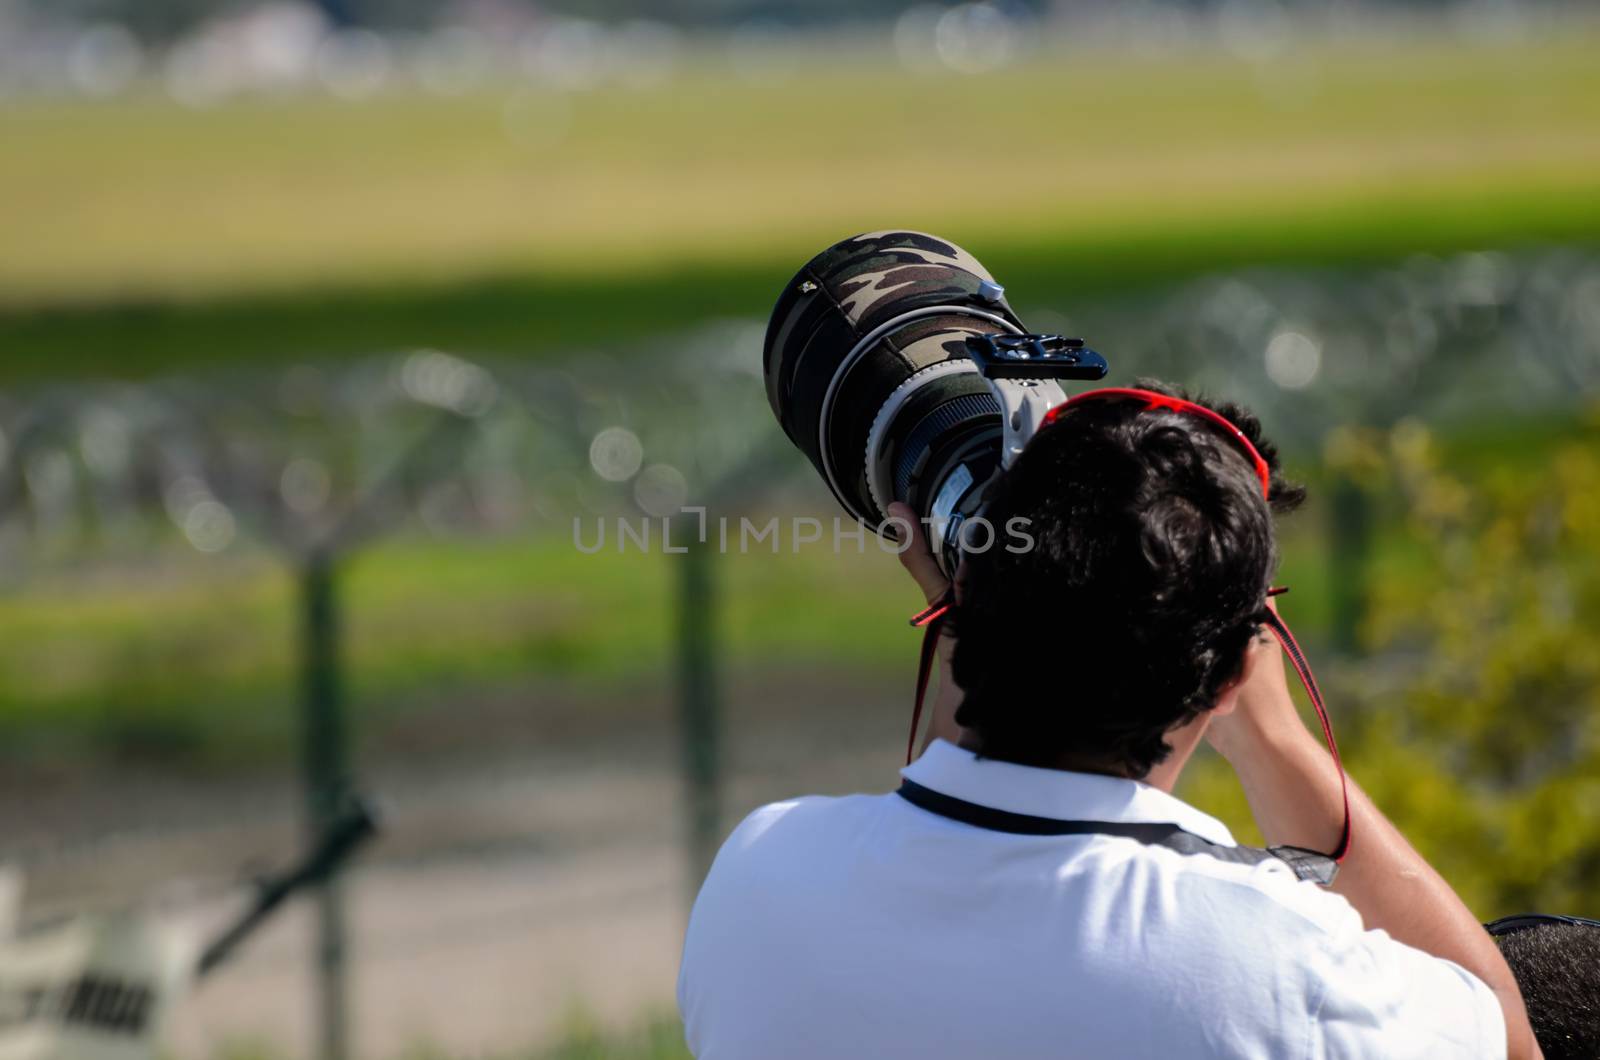 Aircraft spotter with camera